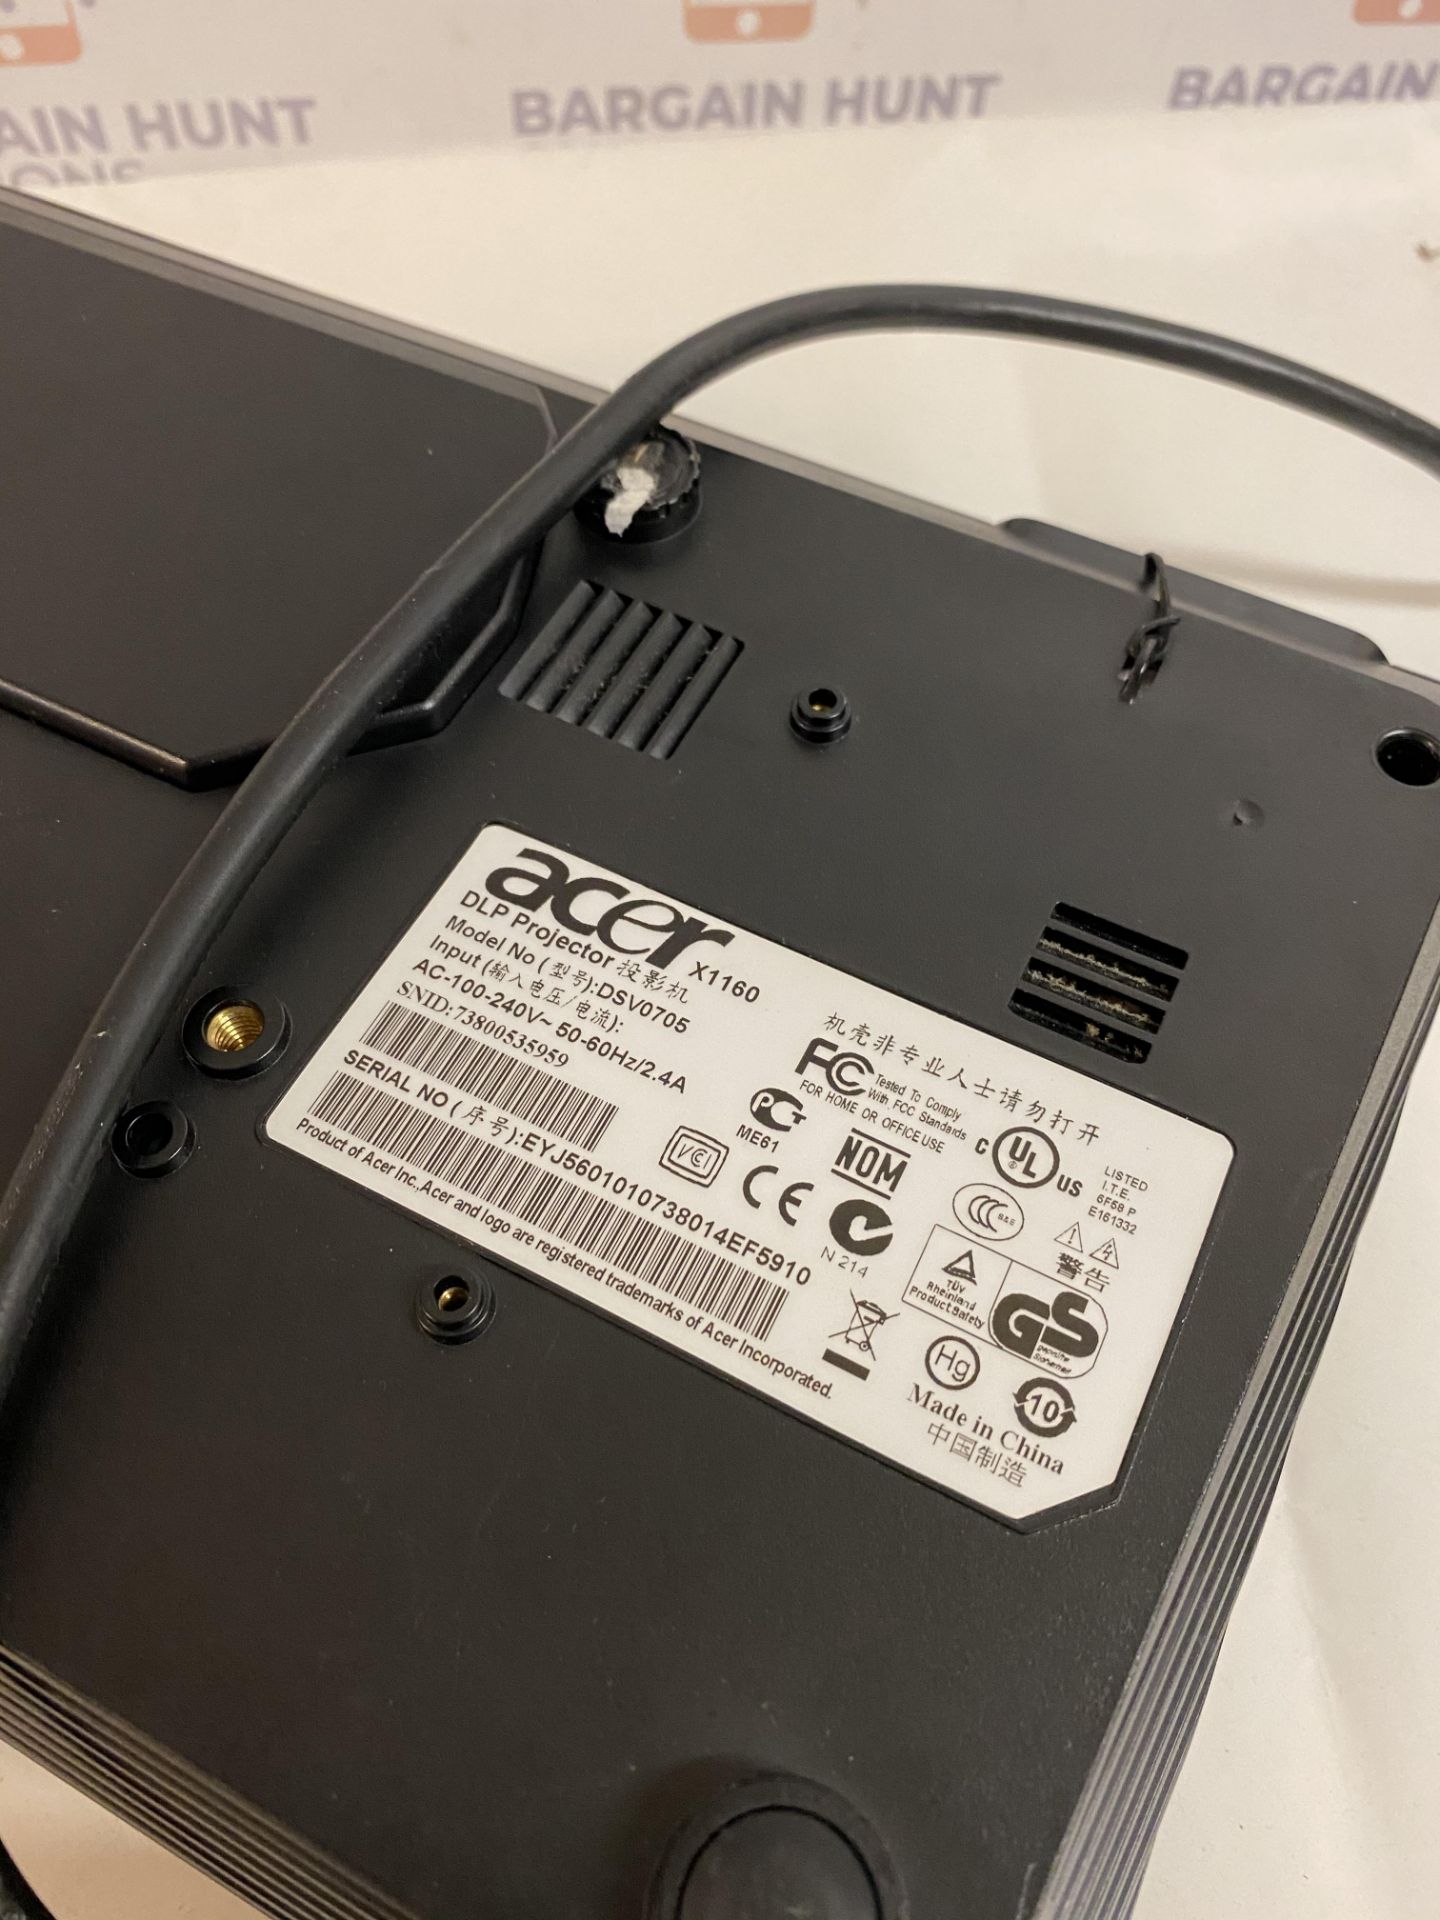 Acer X1160 - DLP Projector (remote control not working, may need new battery) - Image 4 of 4